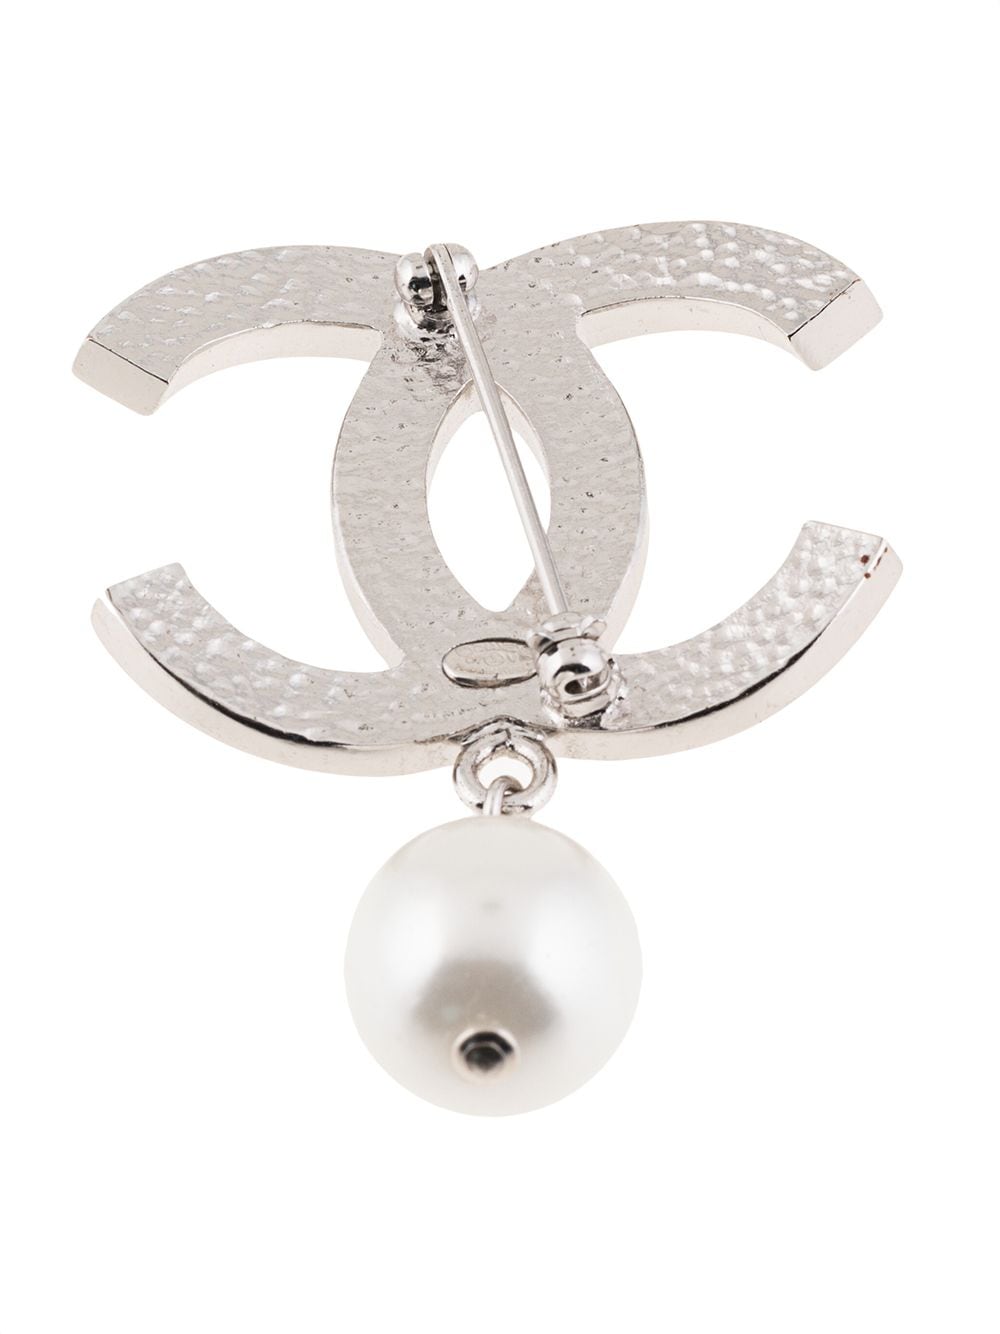 CHANEL Pre-Owned 2007 faux-pearl Embellished CC Brooch - Farfetch